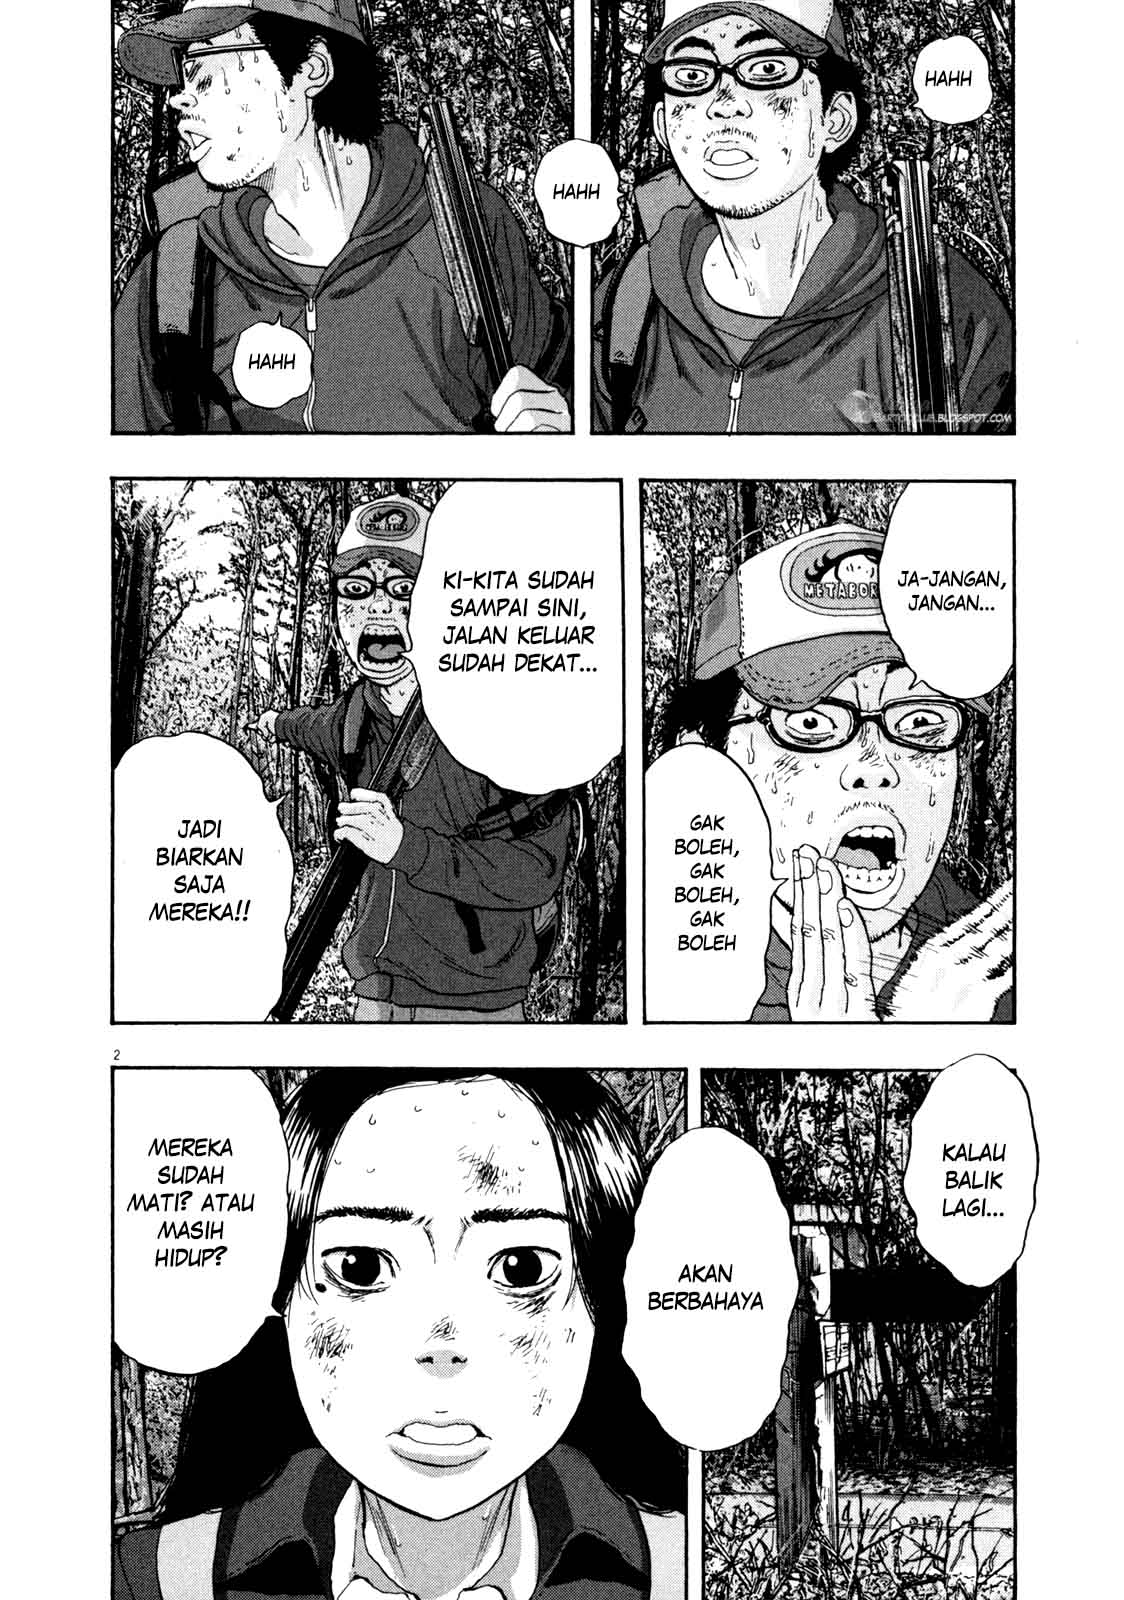 I Am a Hero Chapter 39